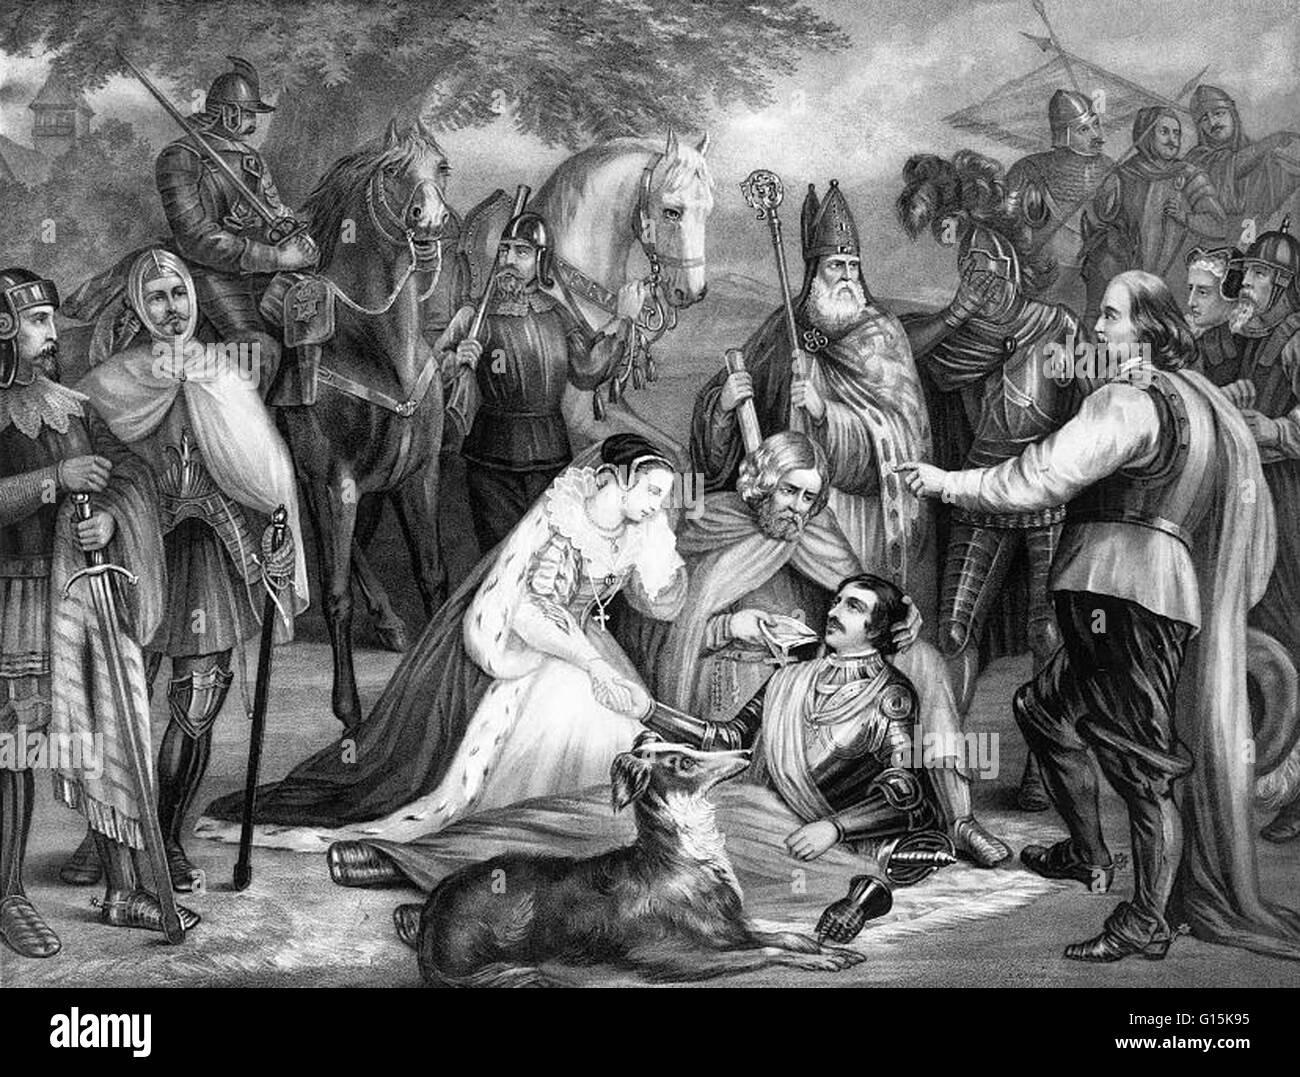 Lithograph entitled: Mary of Scotland mourning over the dying Douglas at the Battle of Langside, 1568. Shows Mary, Queen of Scots, is kneeling next to George(?) Douglas, who was mortally wounded during the battle of Langside, a priest administers last rit Stock Photo